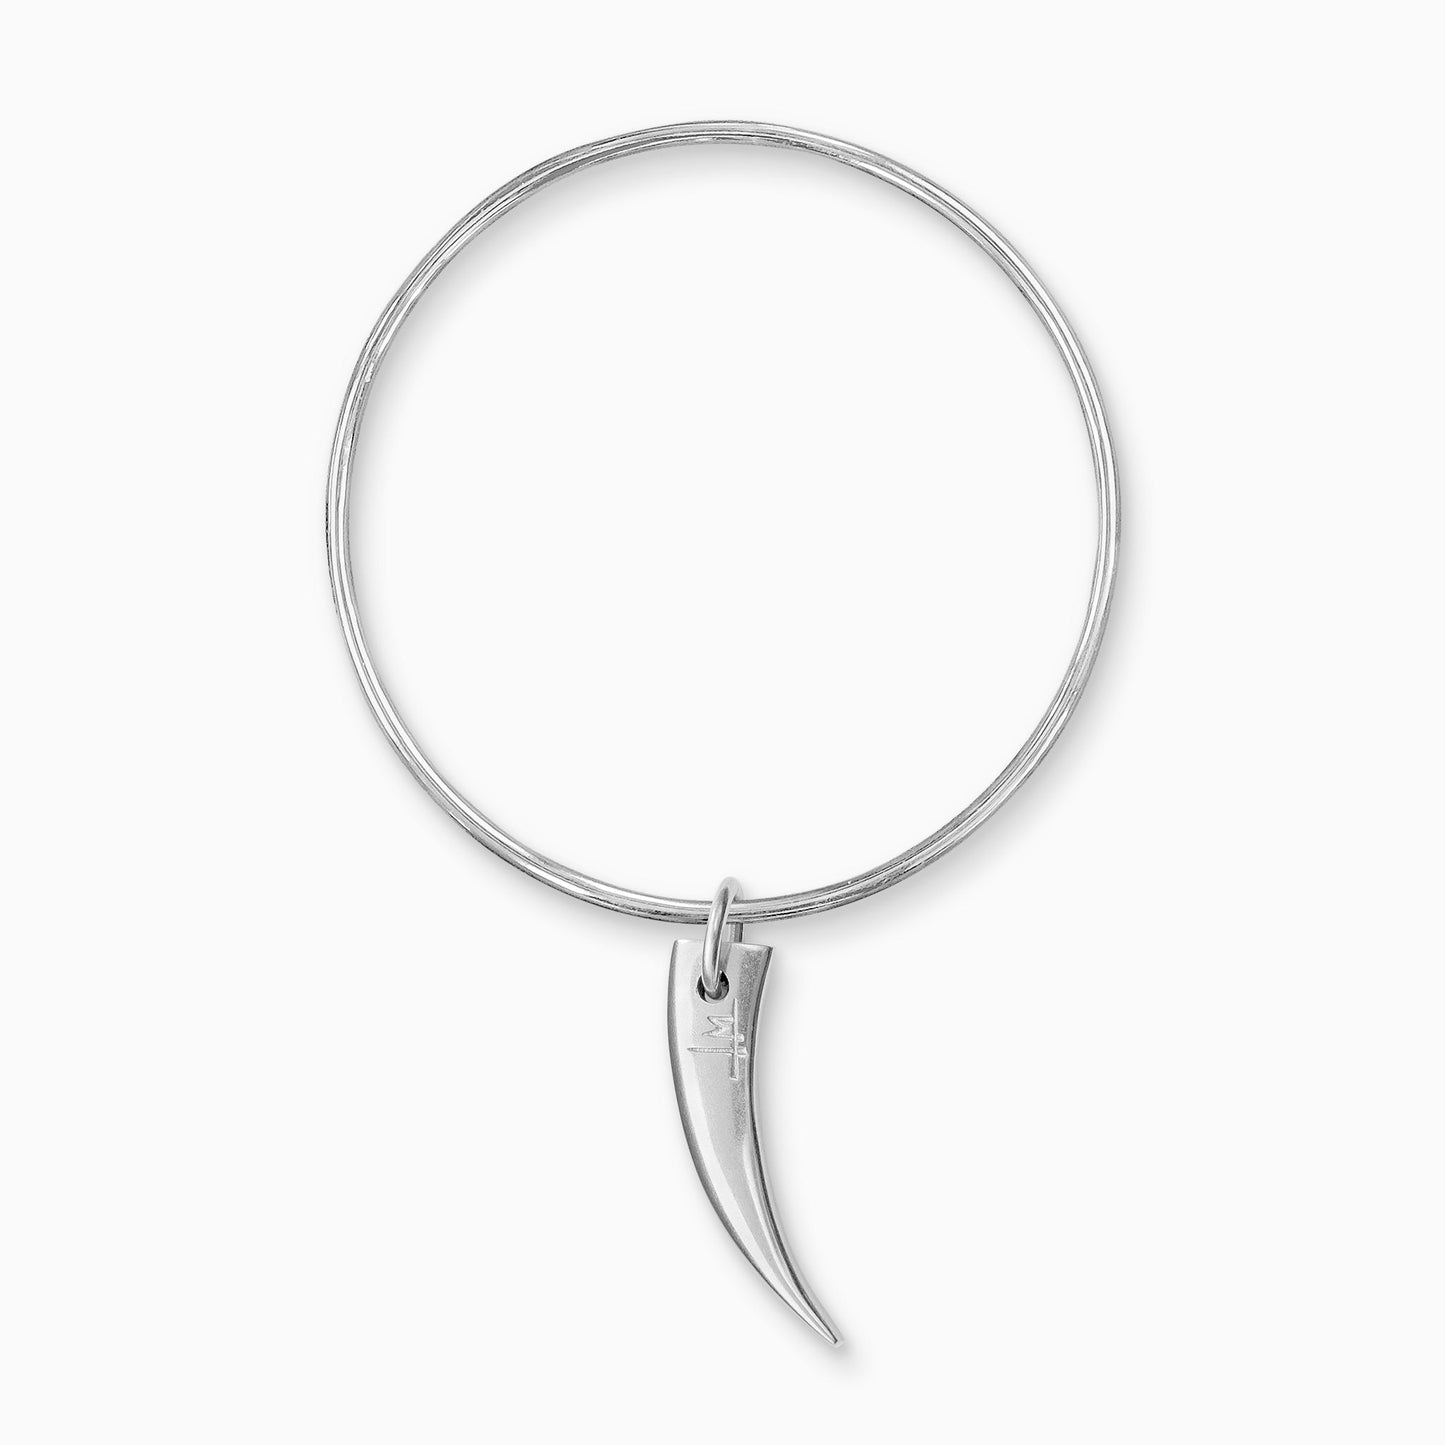 A recycled Silver smooth, tusk shaped charm, freely moving on a round wire bangle.  Charm 63mm. Bangle 63mm inside diameter x 2mm round wire.